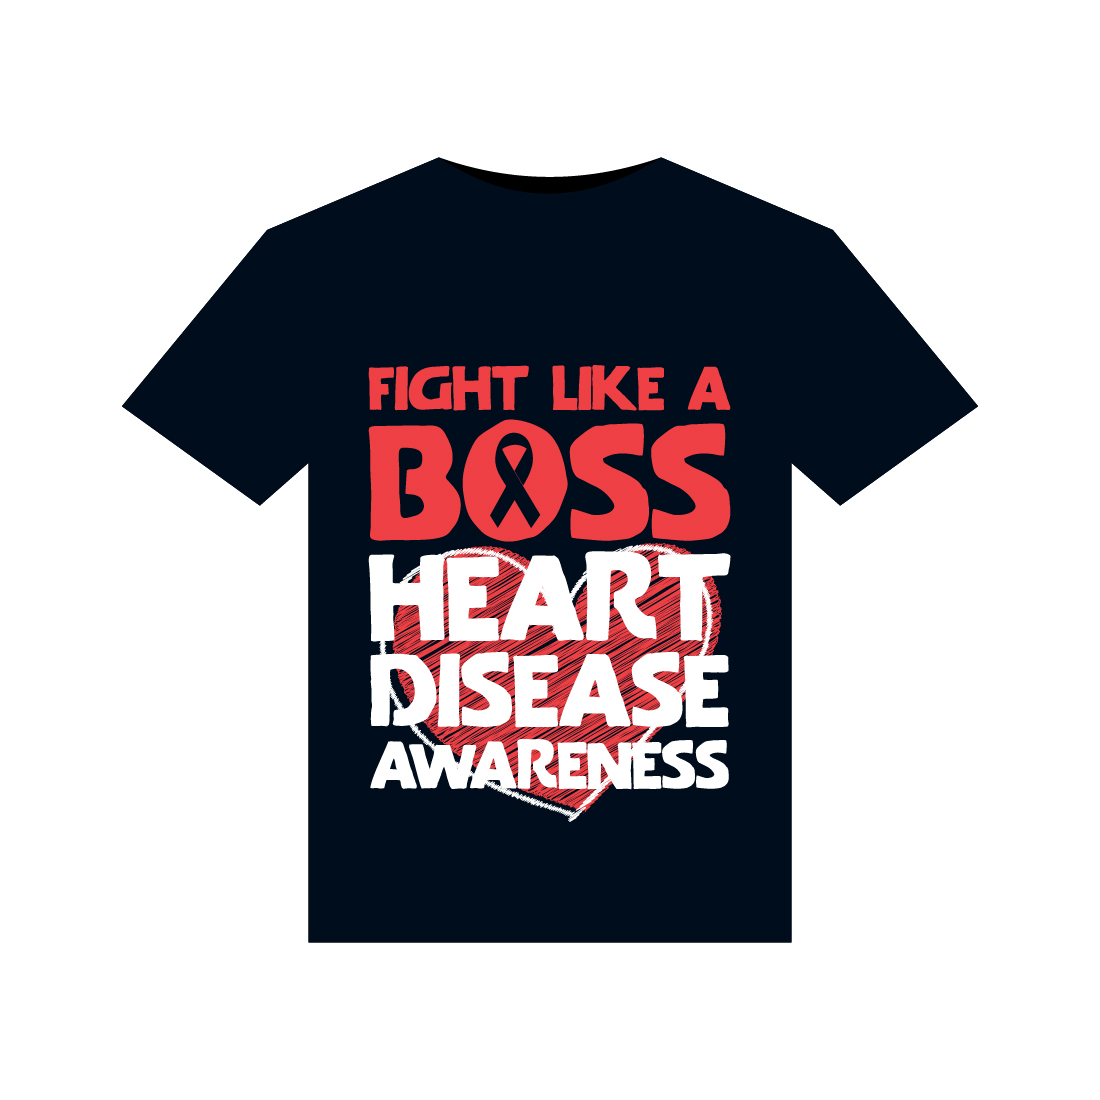 Heart Disease Warrior illustrations for print-ready T-Shirts design cover image.